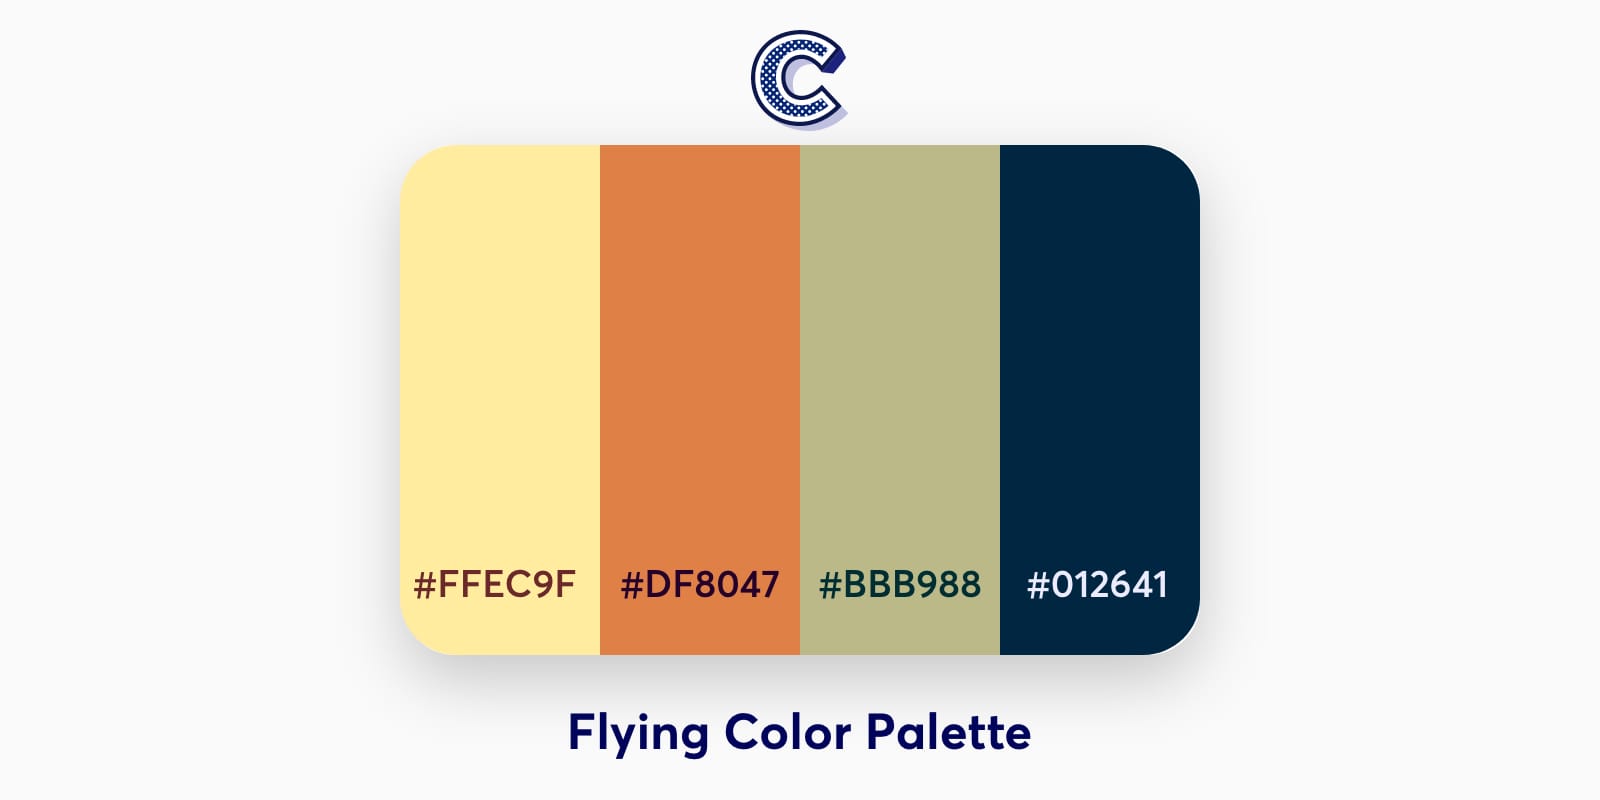 the featured image of flying color palette